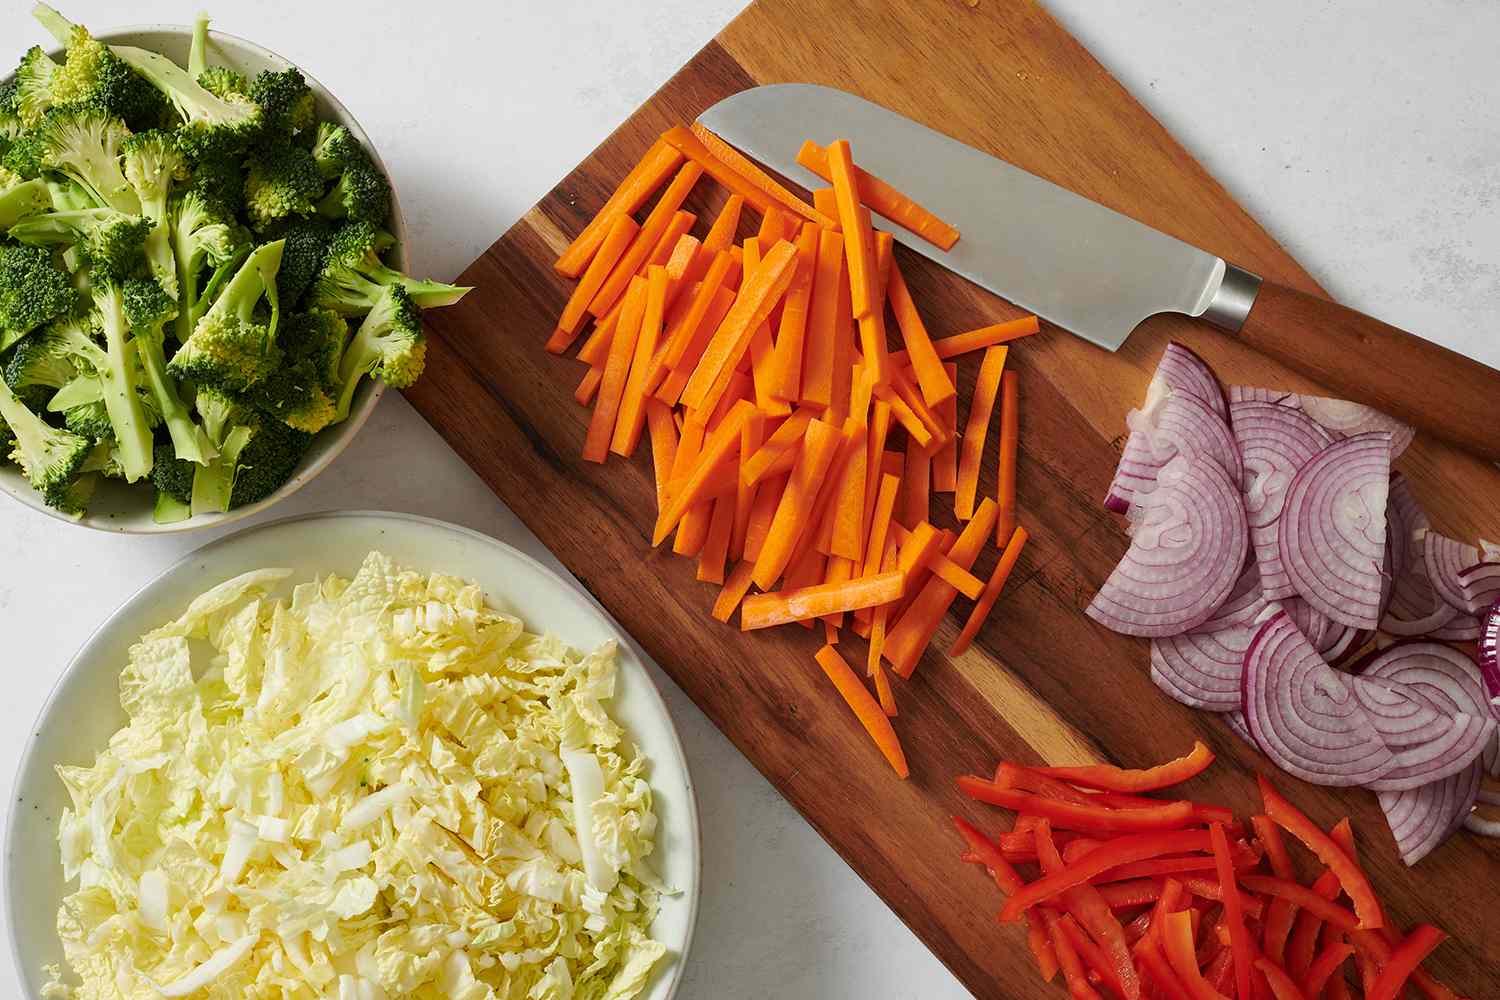 Prepared cabbage, onion, broccoli, carrots, bell pepper, and onion on a cutting board